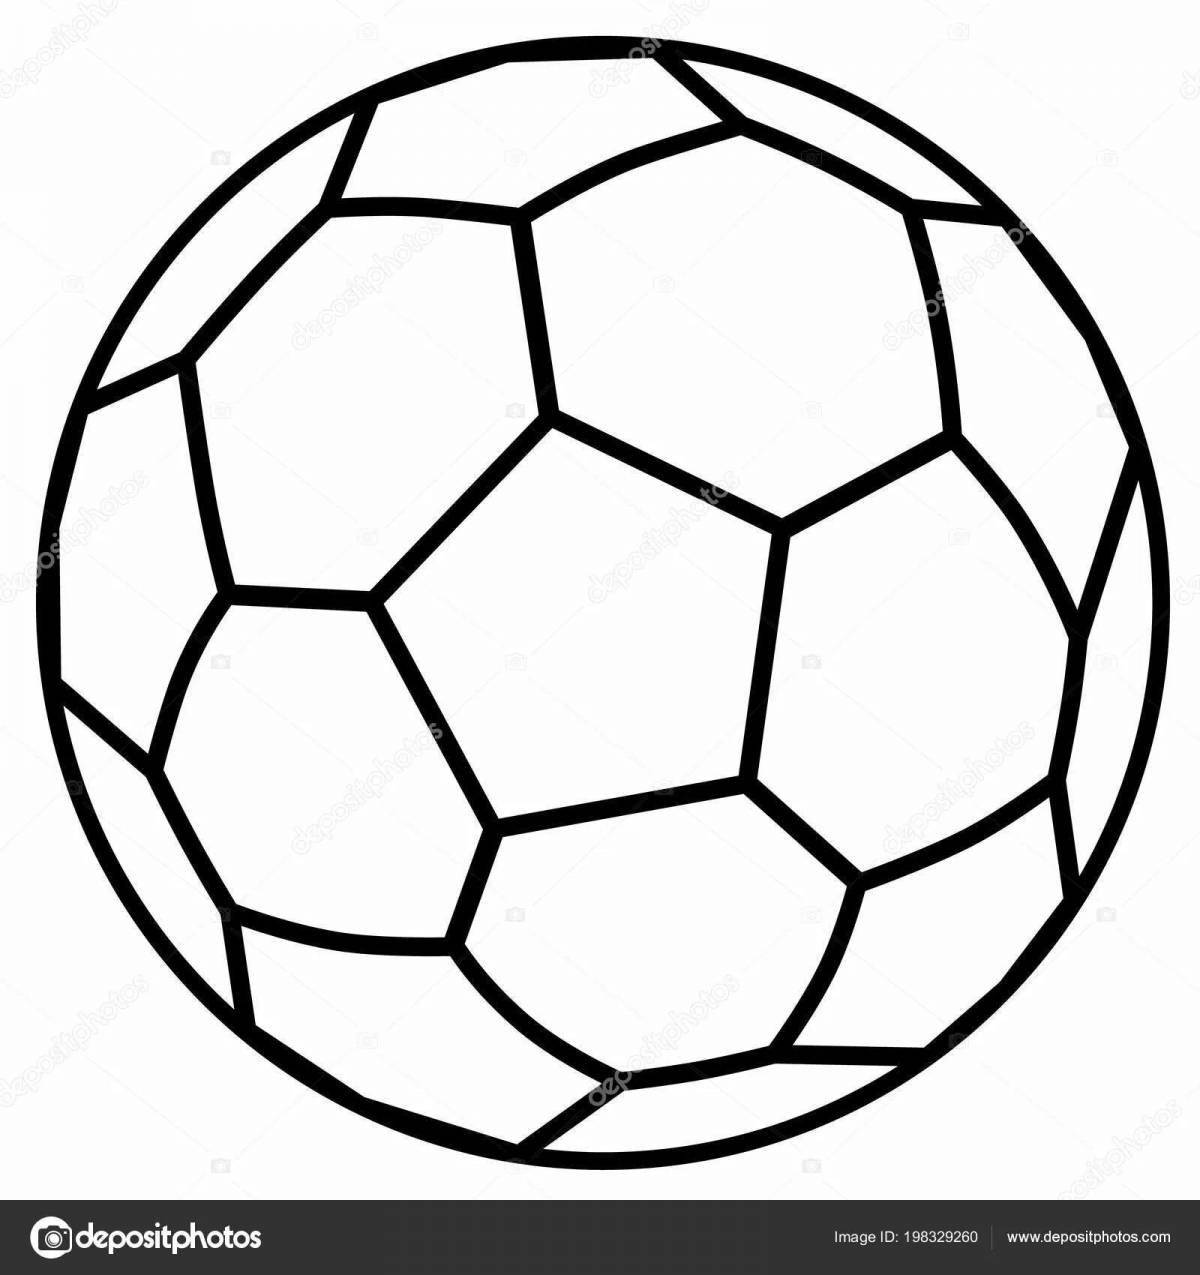 Crazy color soccer ball coloring pages for kids